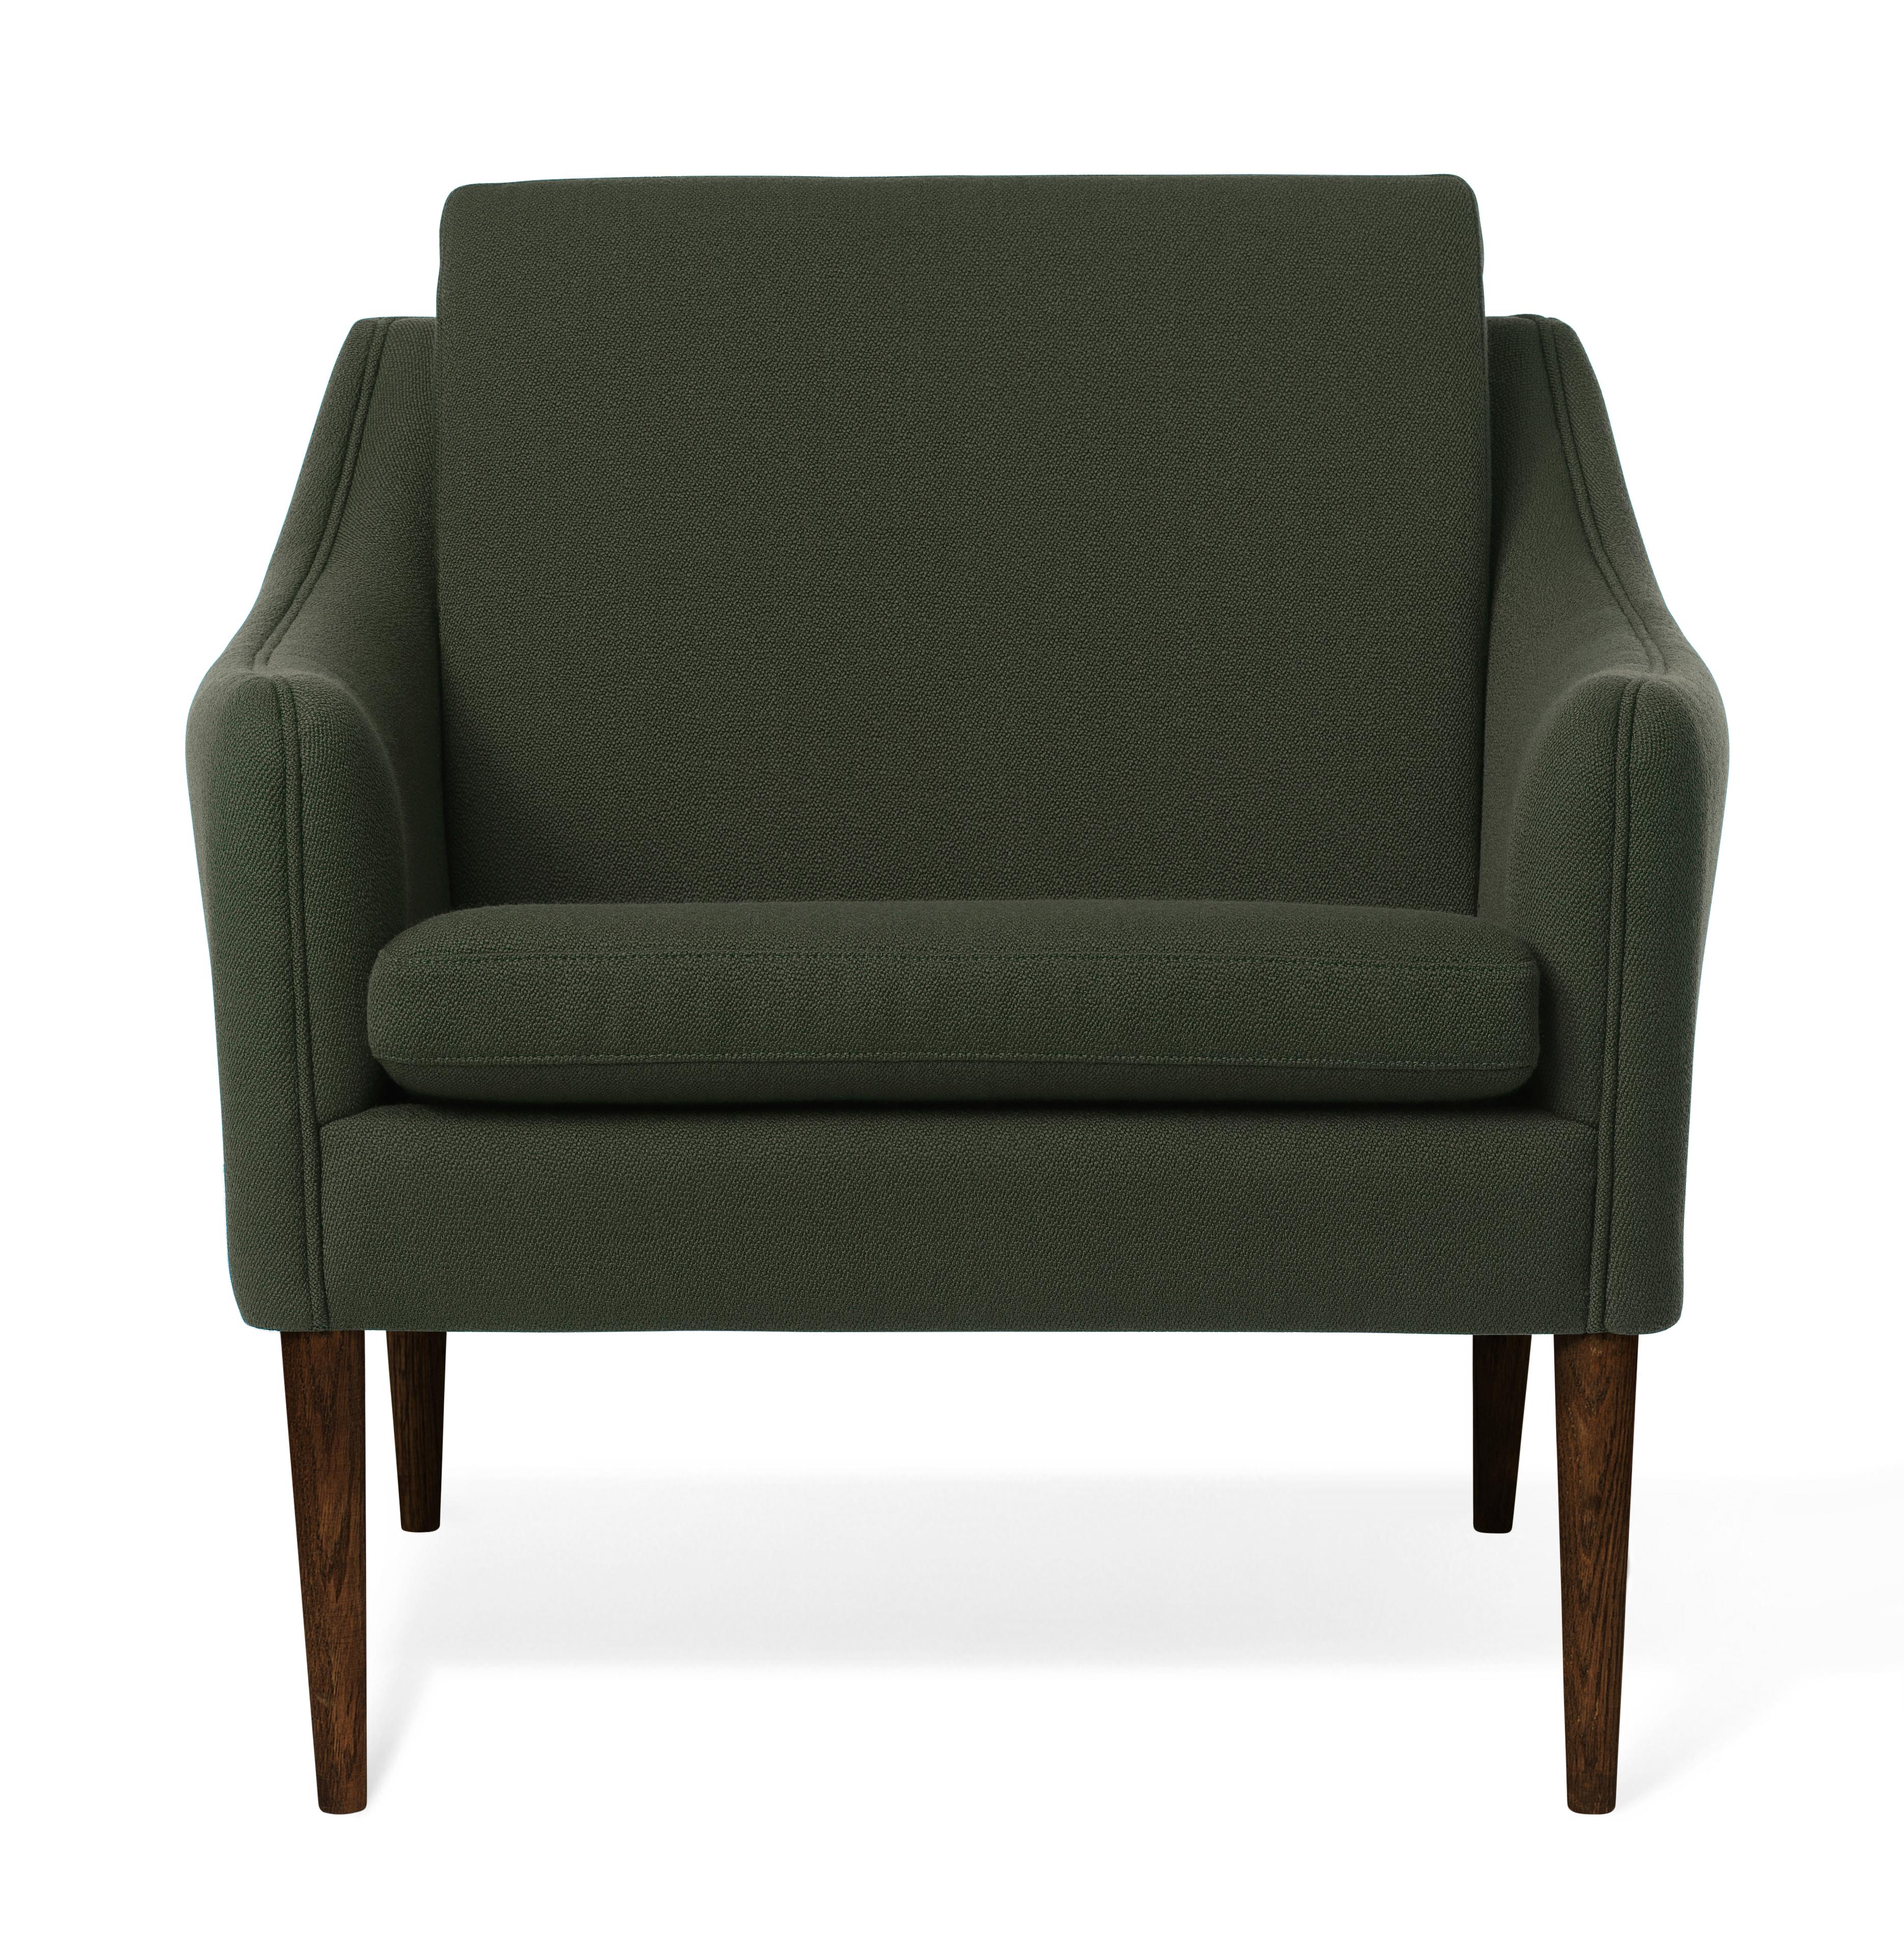 For Sale: Green (Vidar972) Mr. Olsen Lounge Chair with Walnut Legs, by Hans Olsen from Warm Nordic